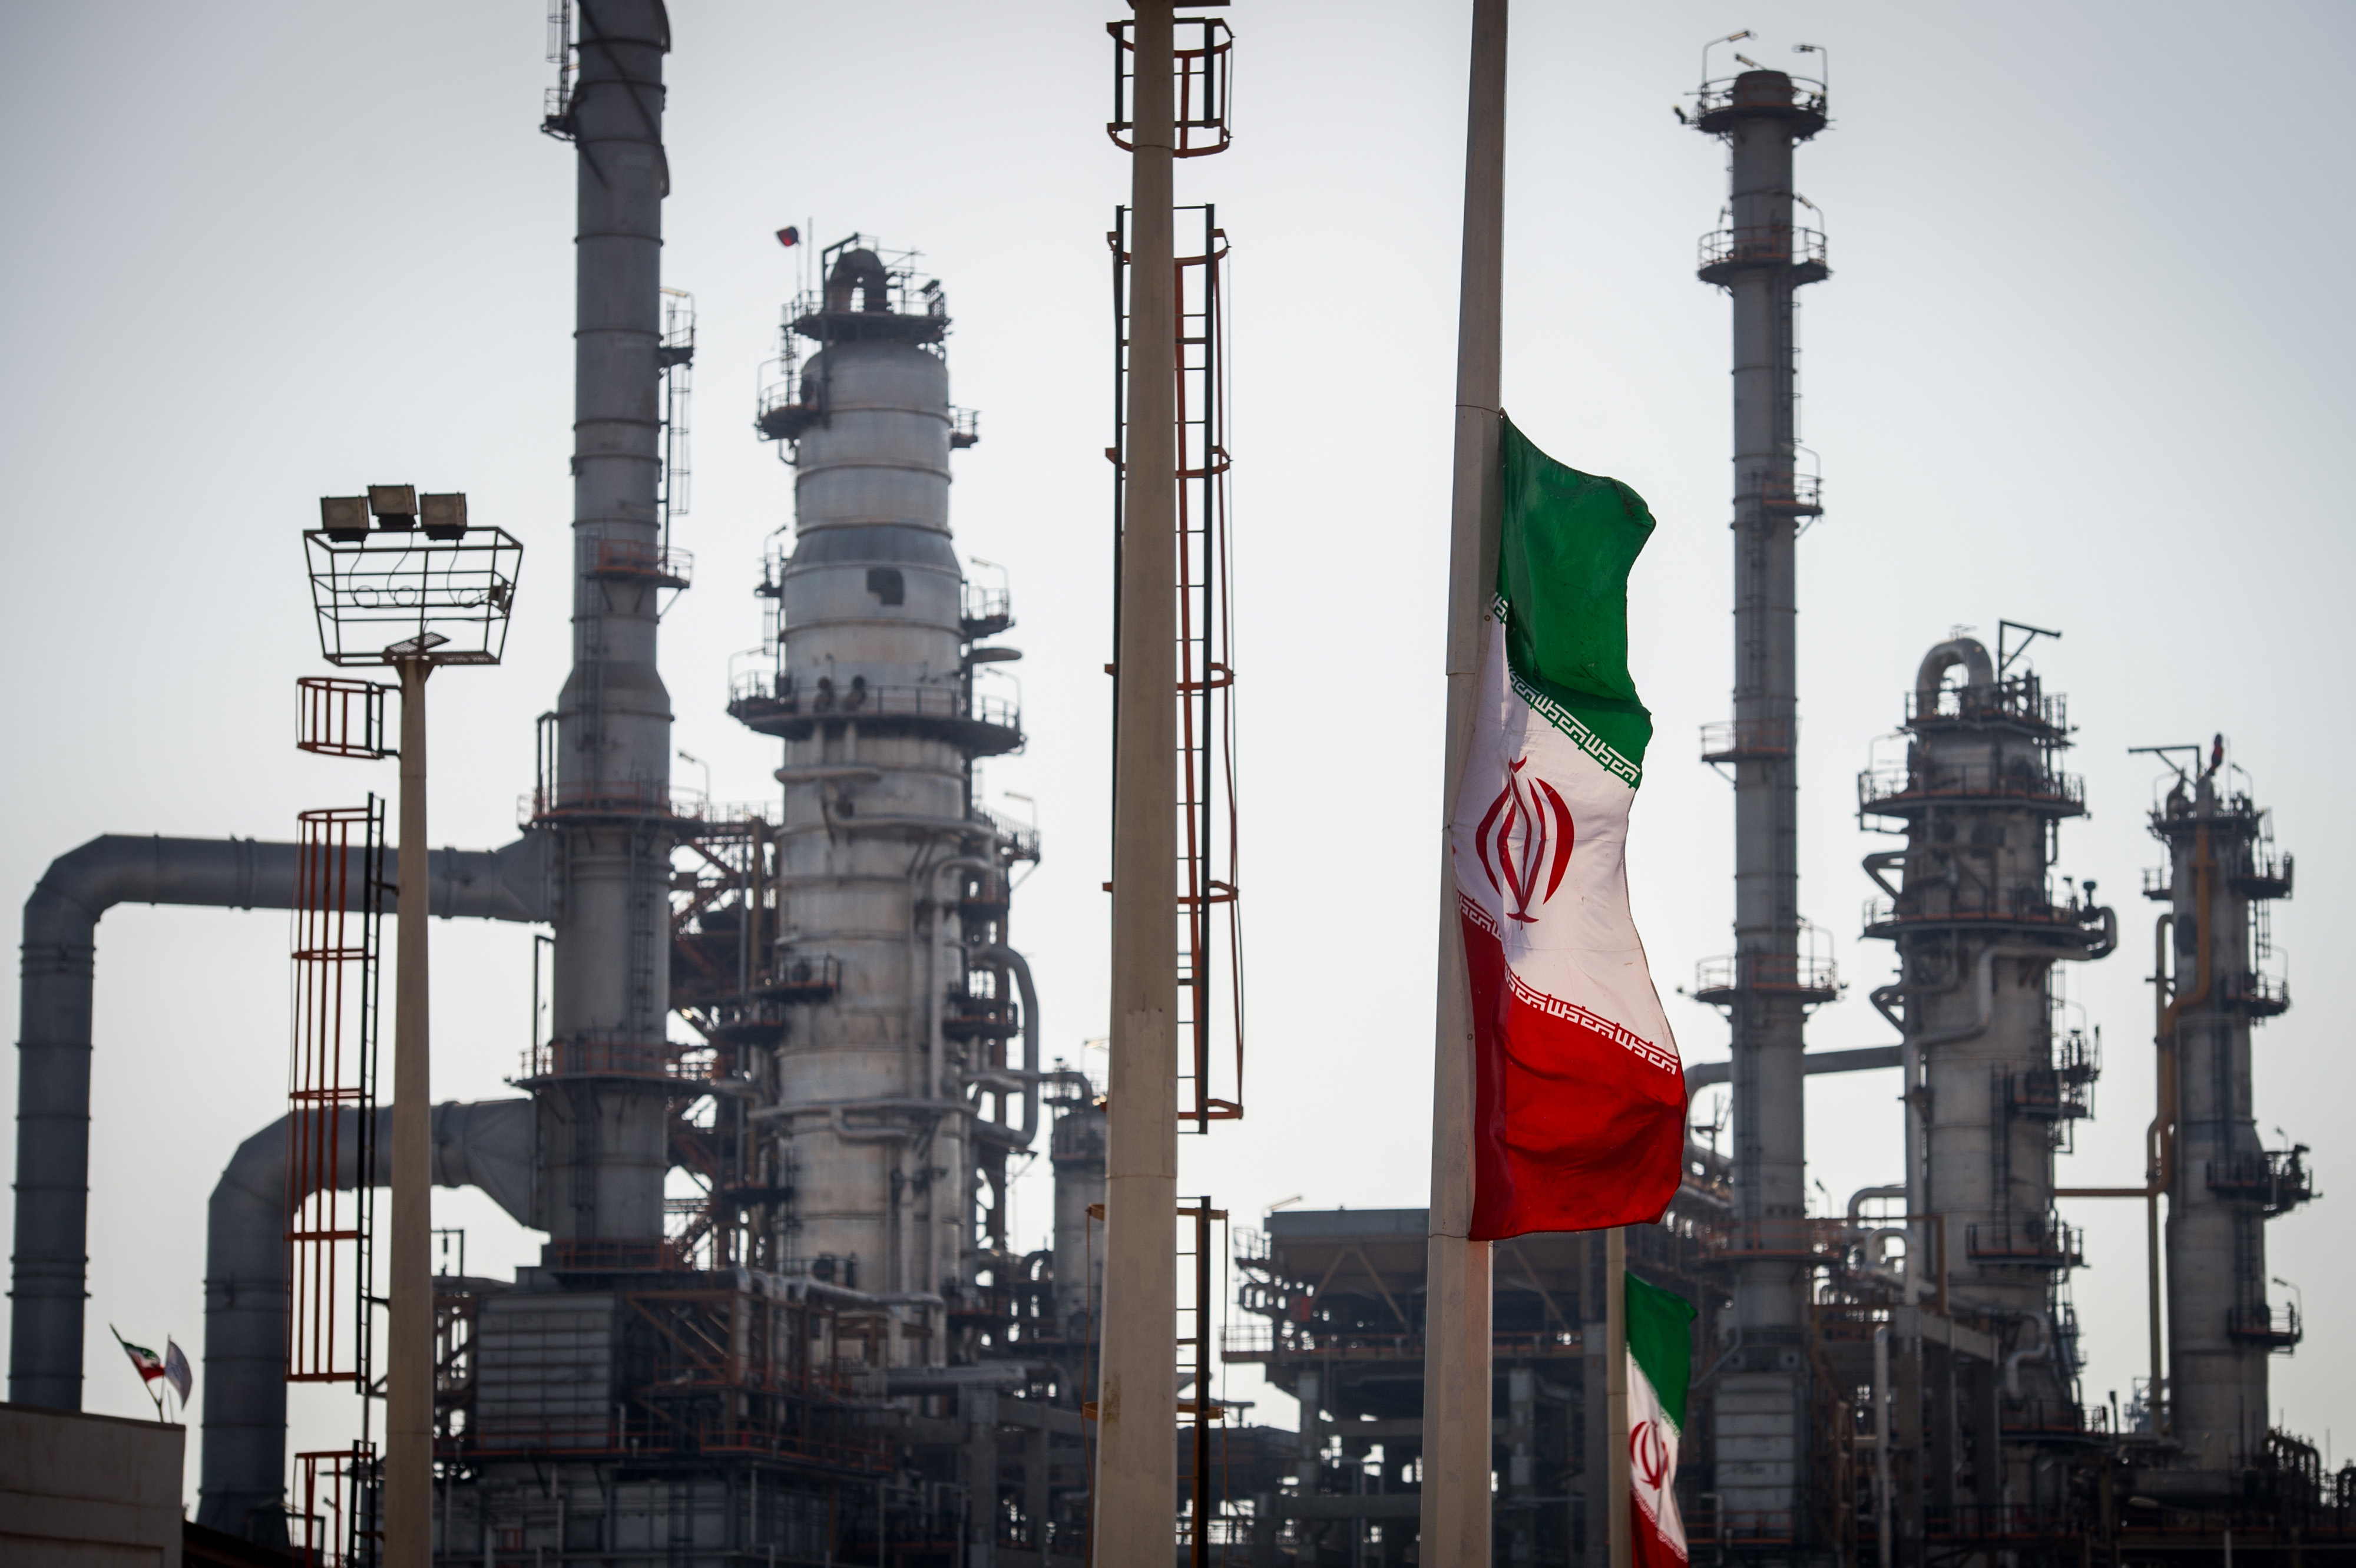 An Iranian national flag flies near gas condensate processing facilities in the new Phase 3 facility at the Persian Gulf Star Co. (PGSPC) refinery in Bandar Abbas, Iran, on Wednesday, Jan. 9. 2019. 
Photographer: Ali Mohammadi/Bloomberg